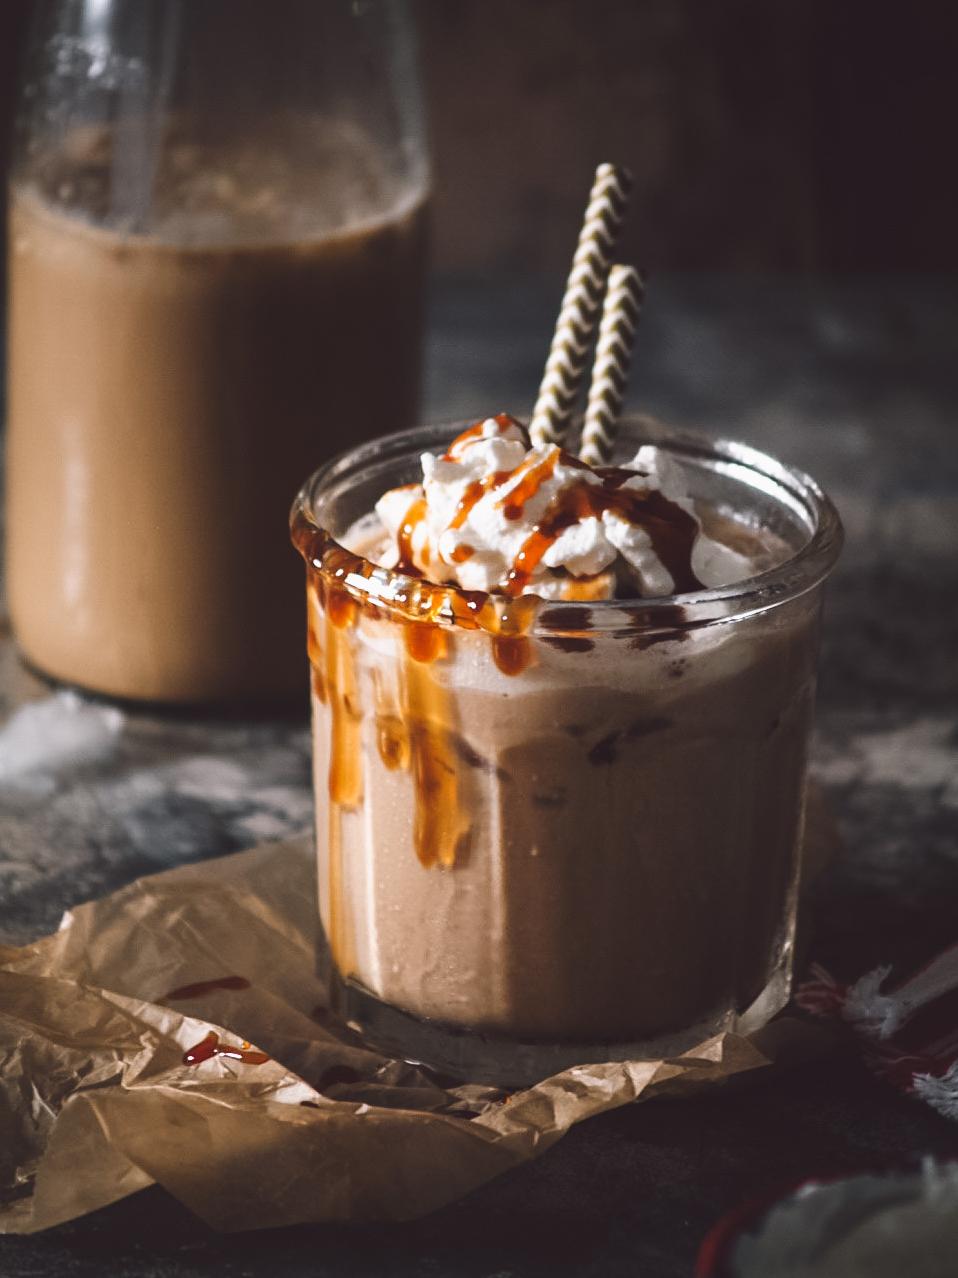  Satisfy your sweet tooth with this toffee-flavored coffee recipe!